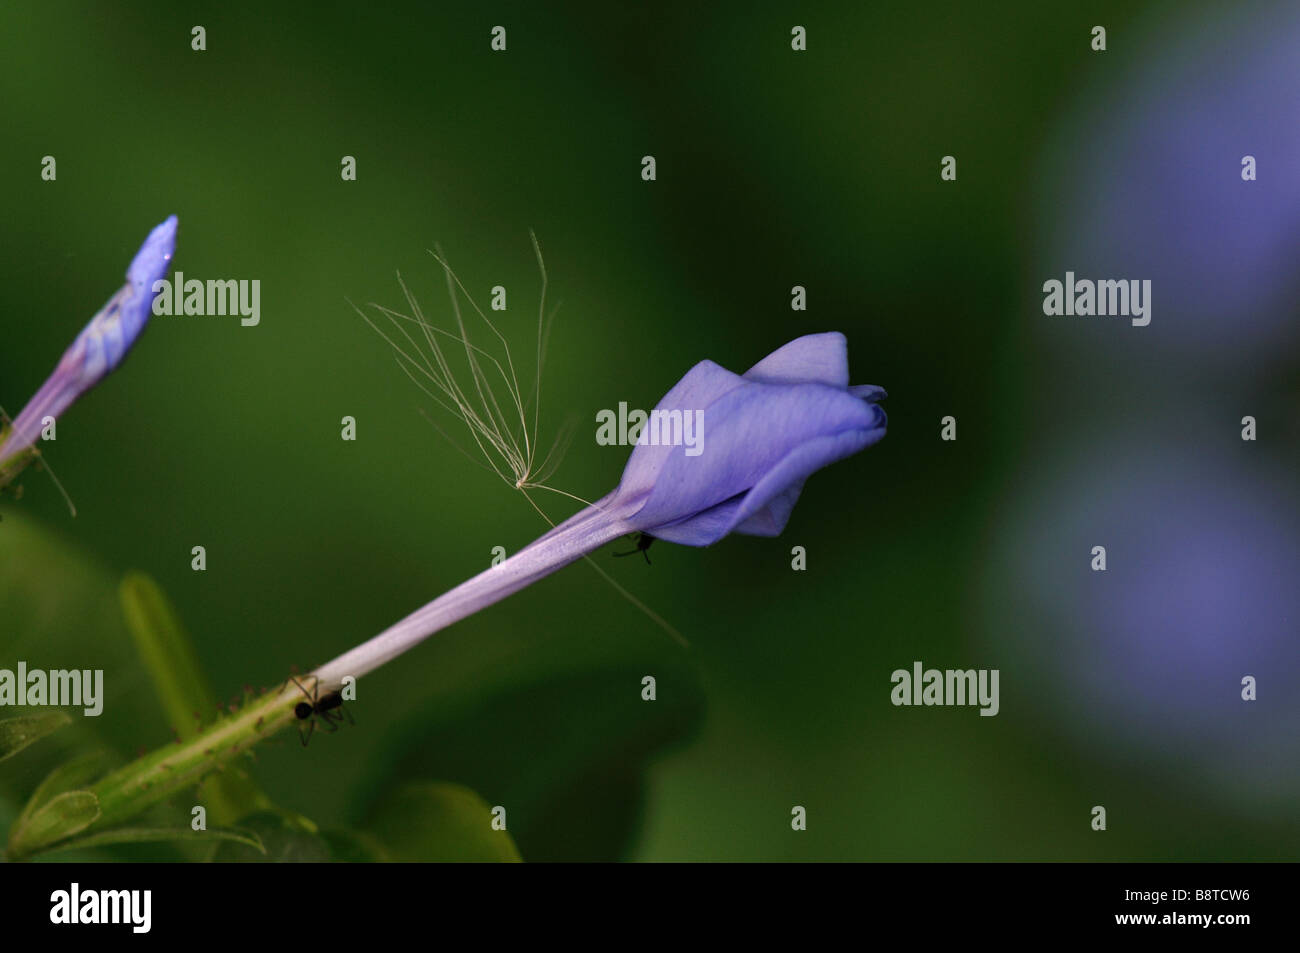 Ants collect sweets from a Plumbago flower bud while a cottony seed drifts past Stock Photo